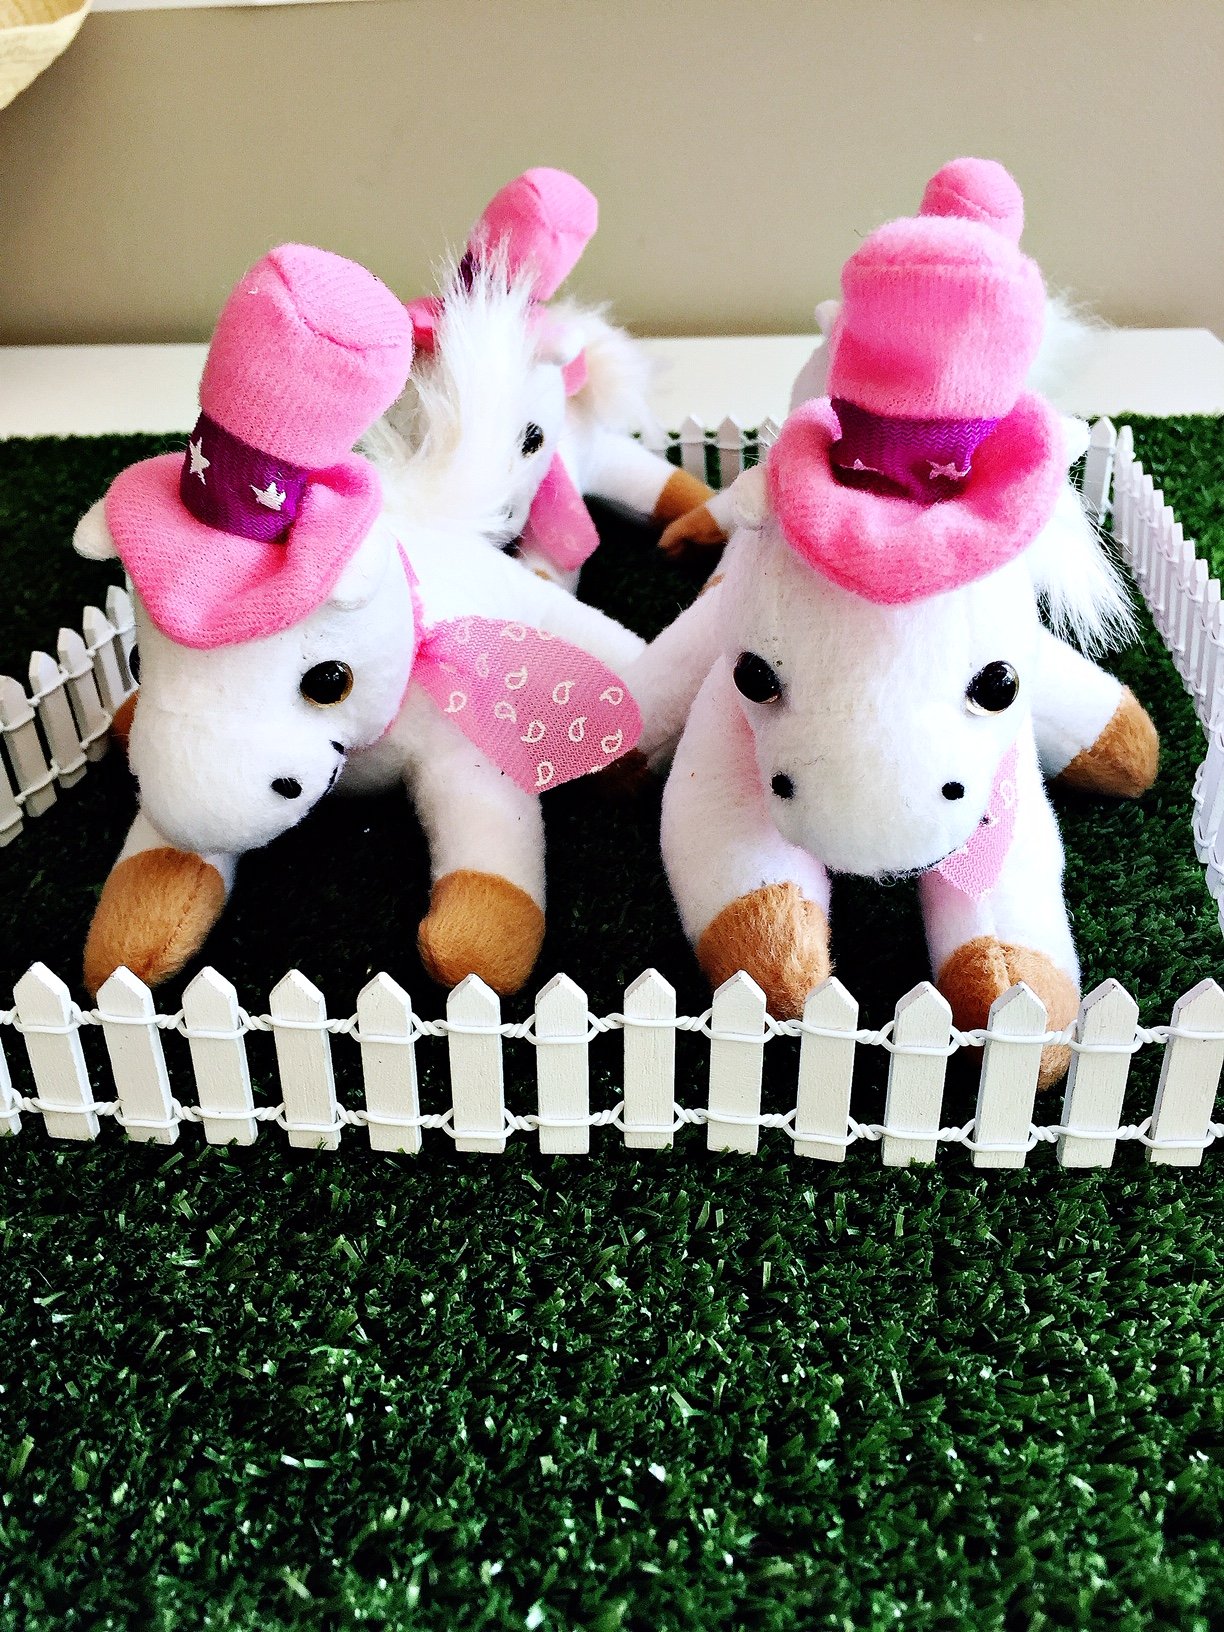 Cowgirl party supplies toy horses in pens table centrepiece